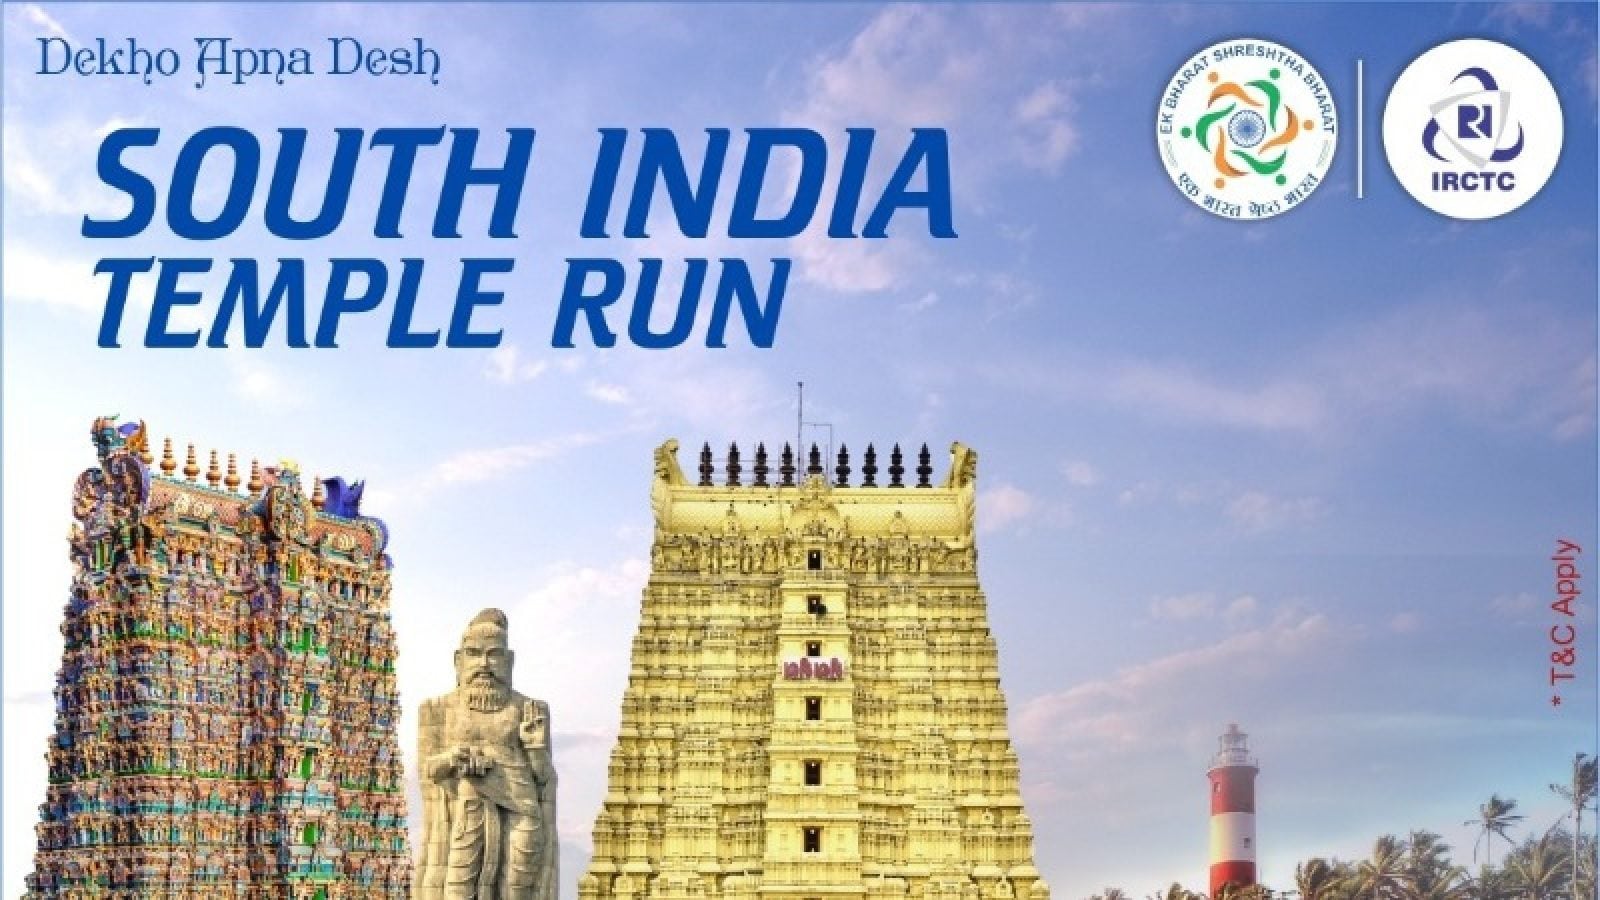 IRCTC tourism announced South India Temple Run tour package from